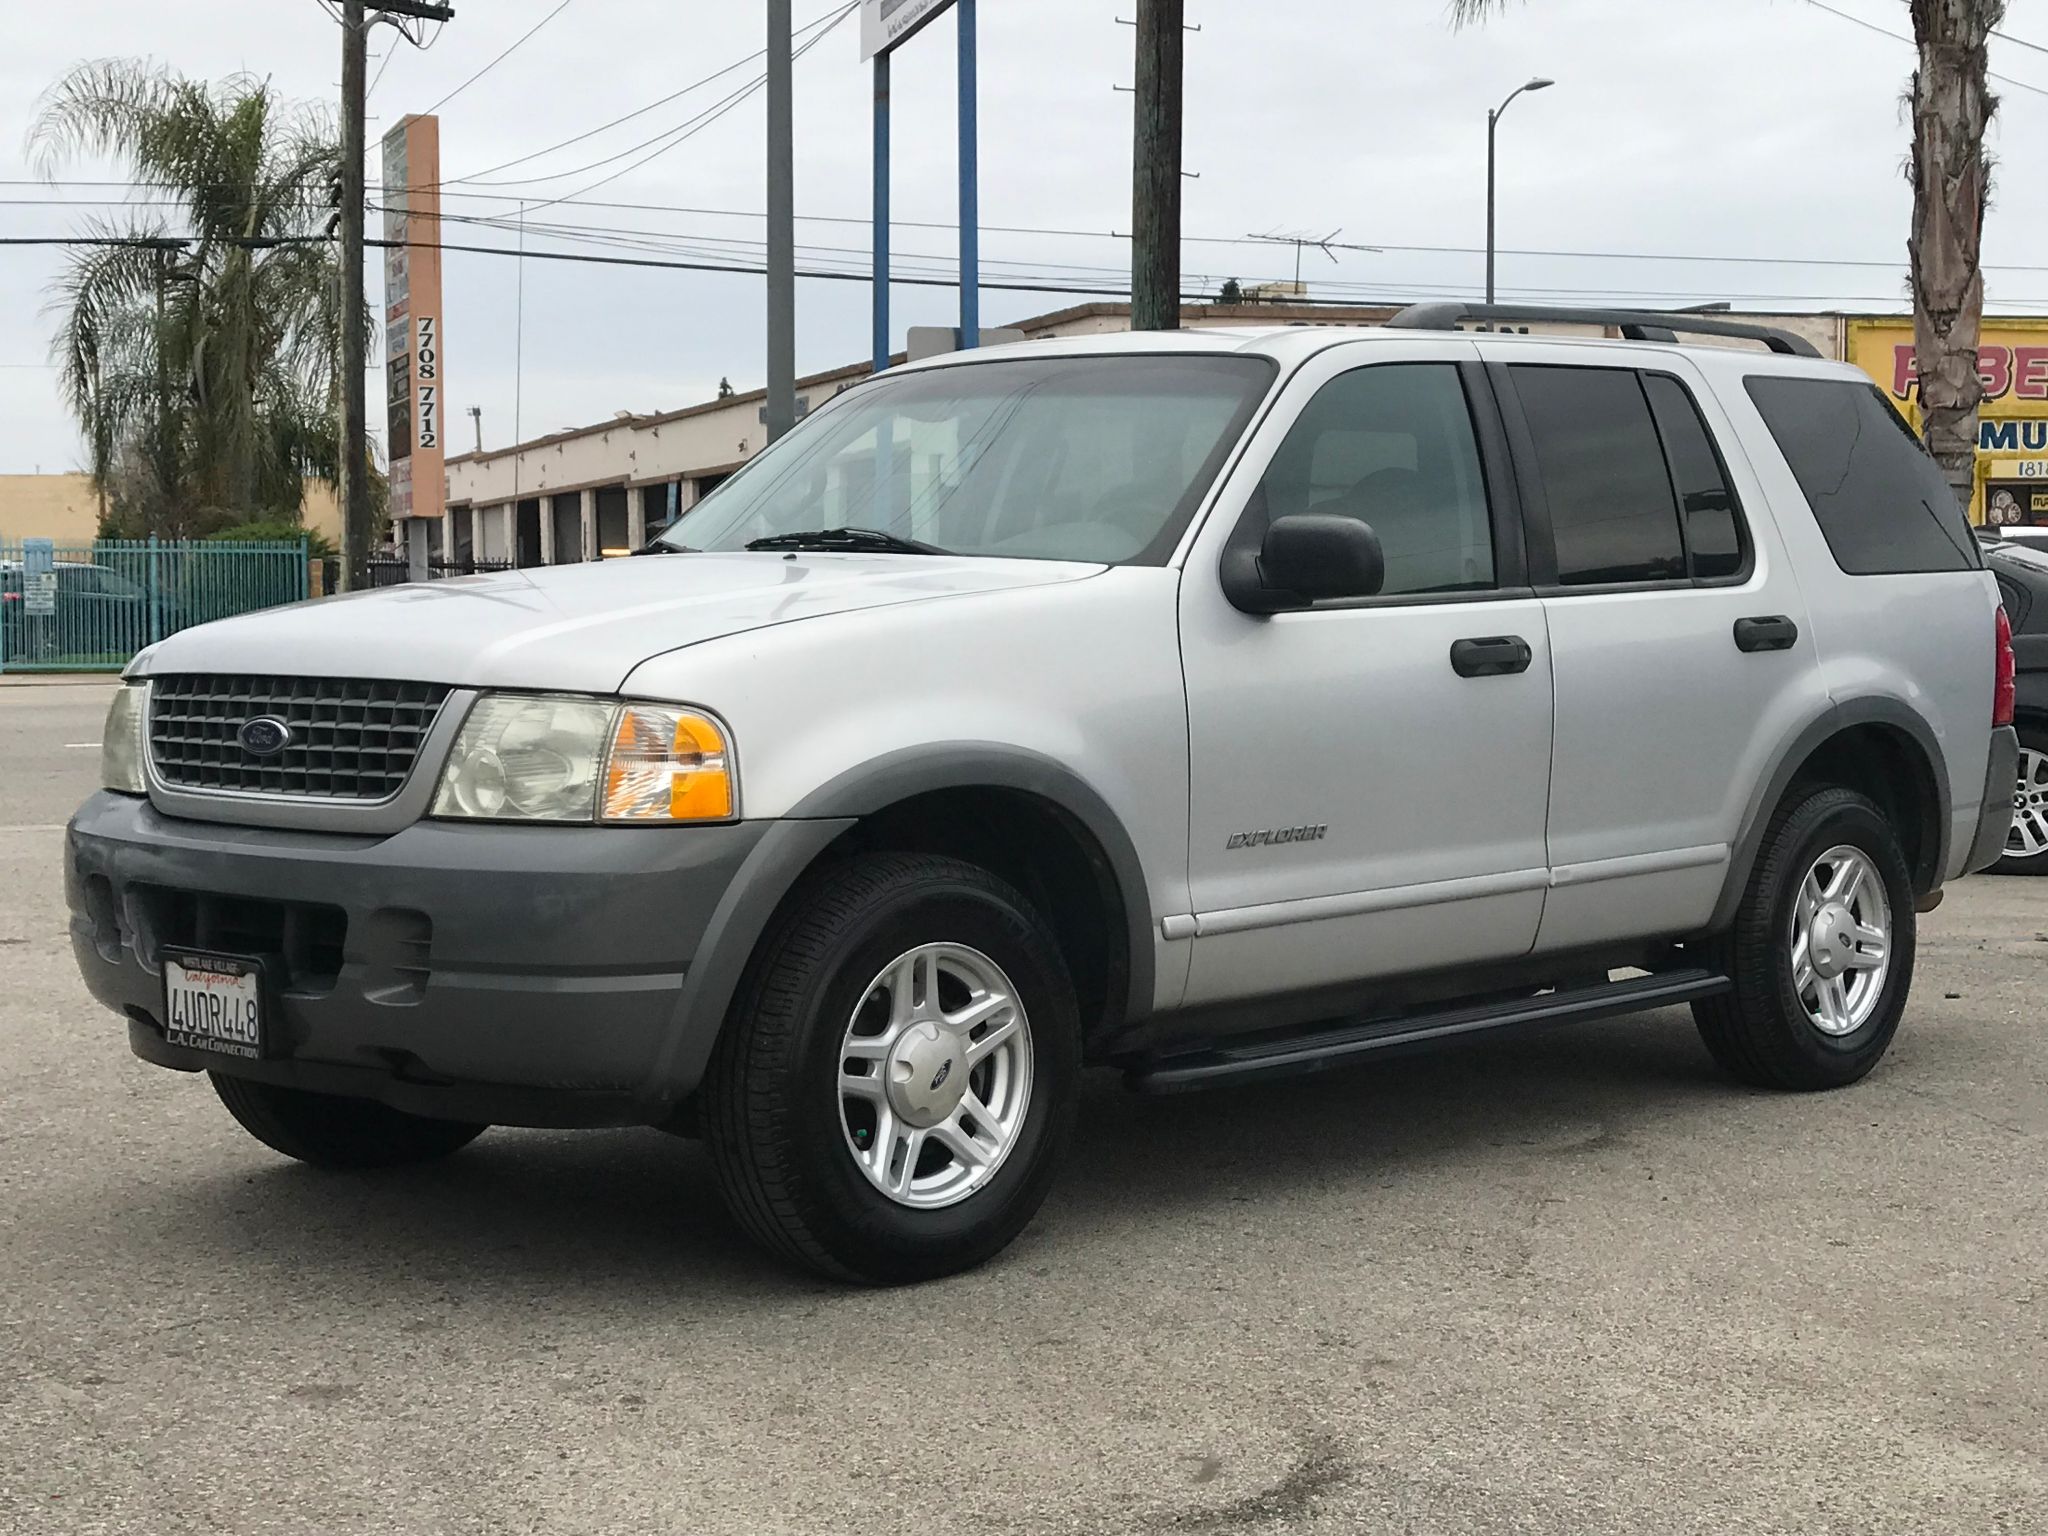 Used 2002 Ford Explorer XLS at City Cars Warehouse Inc